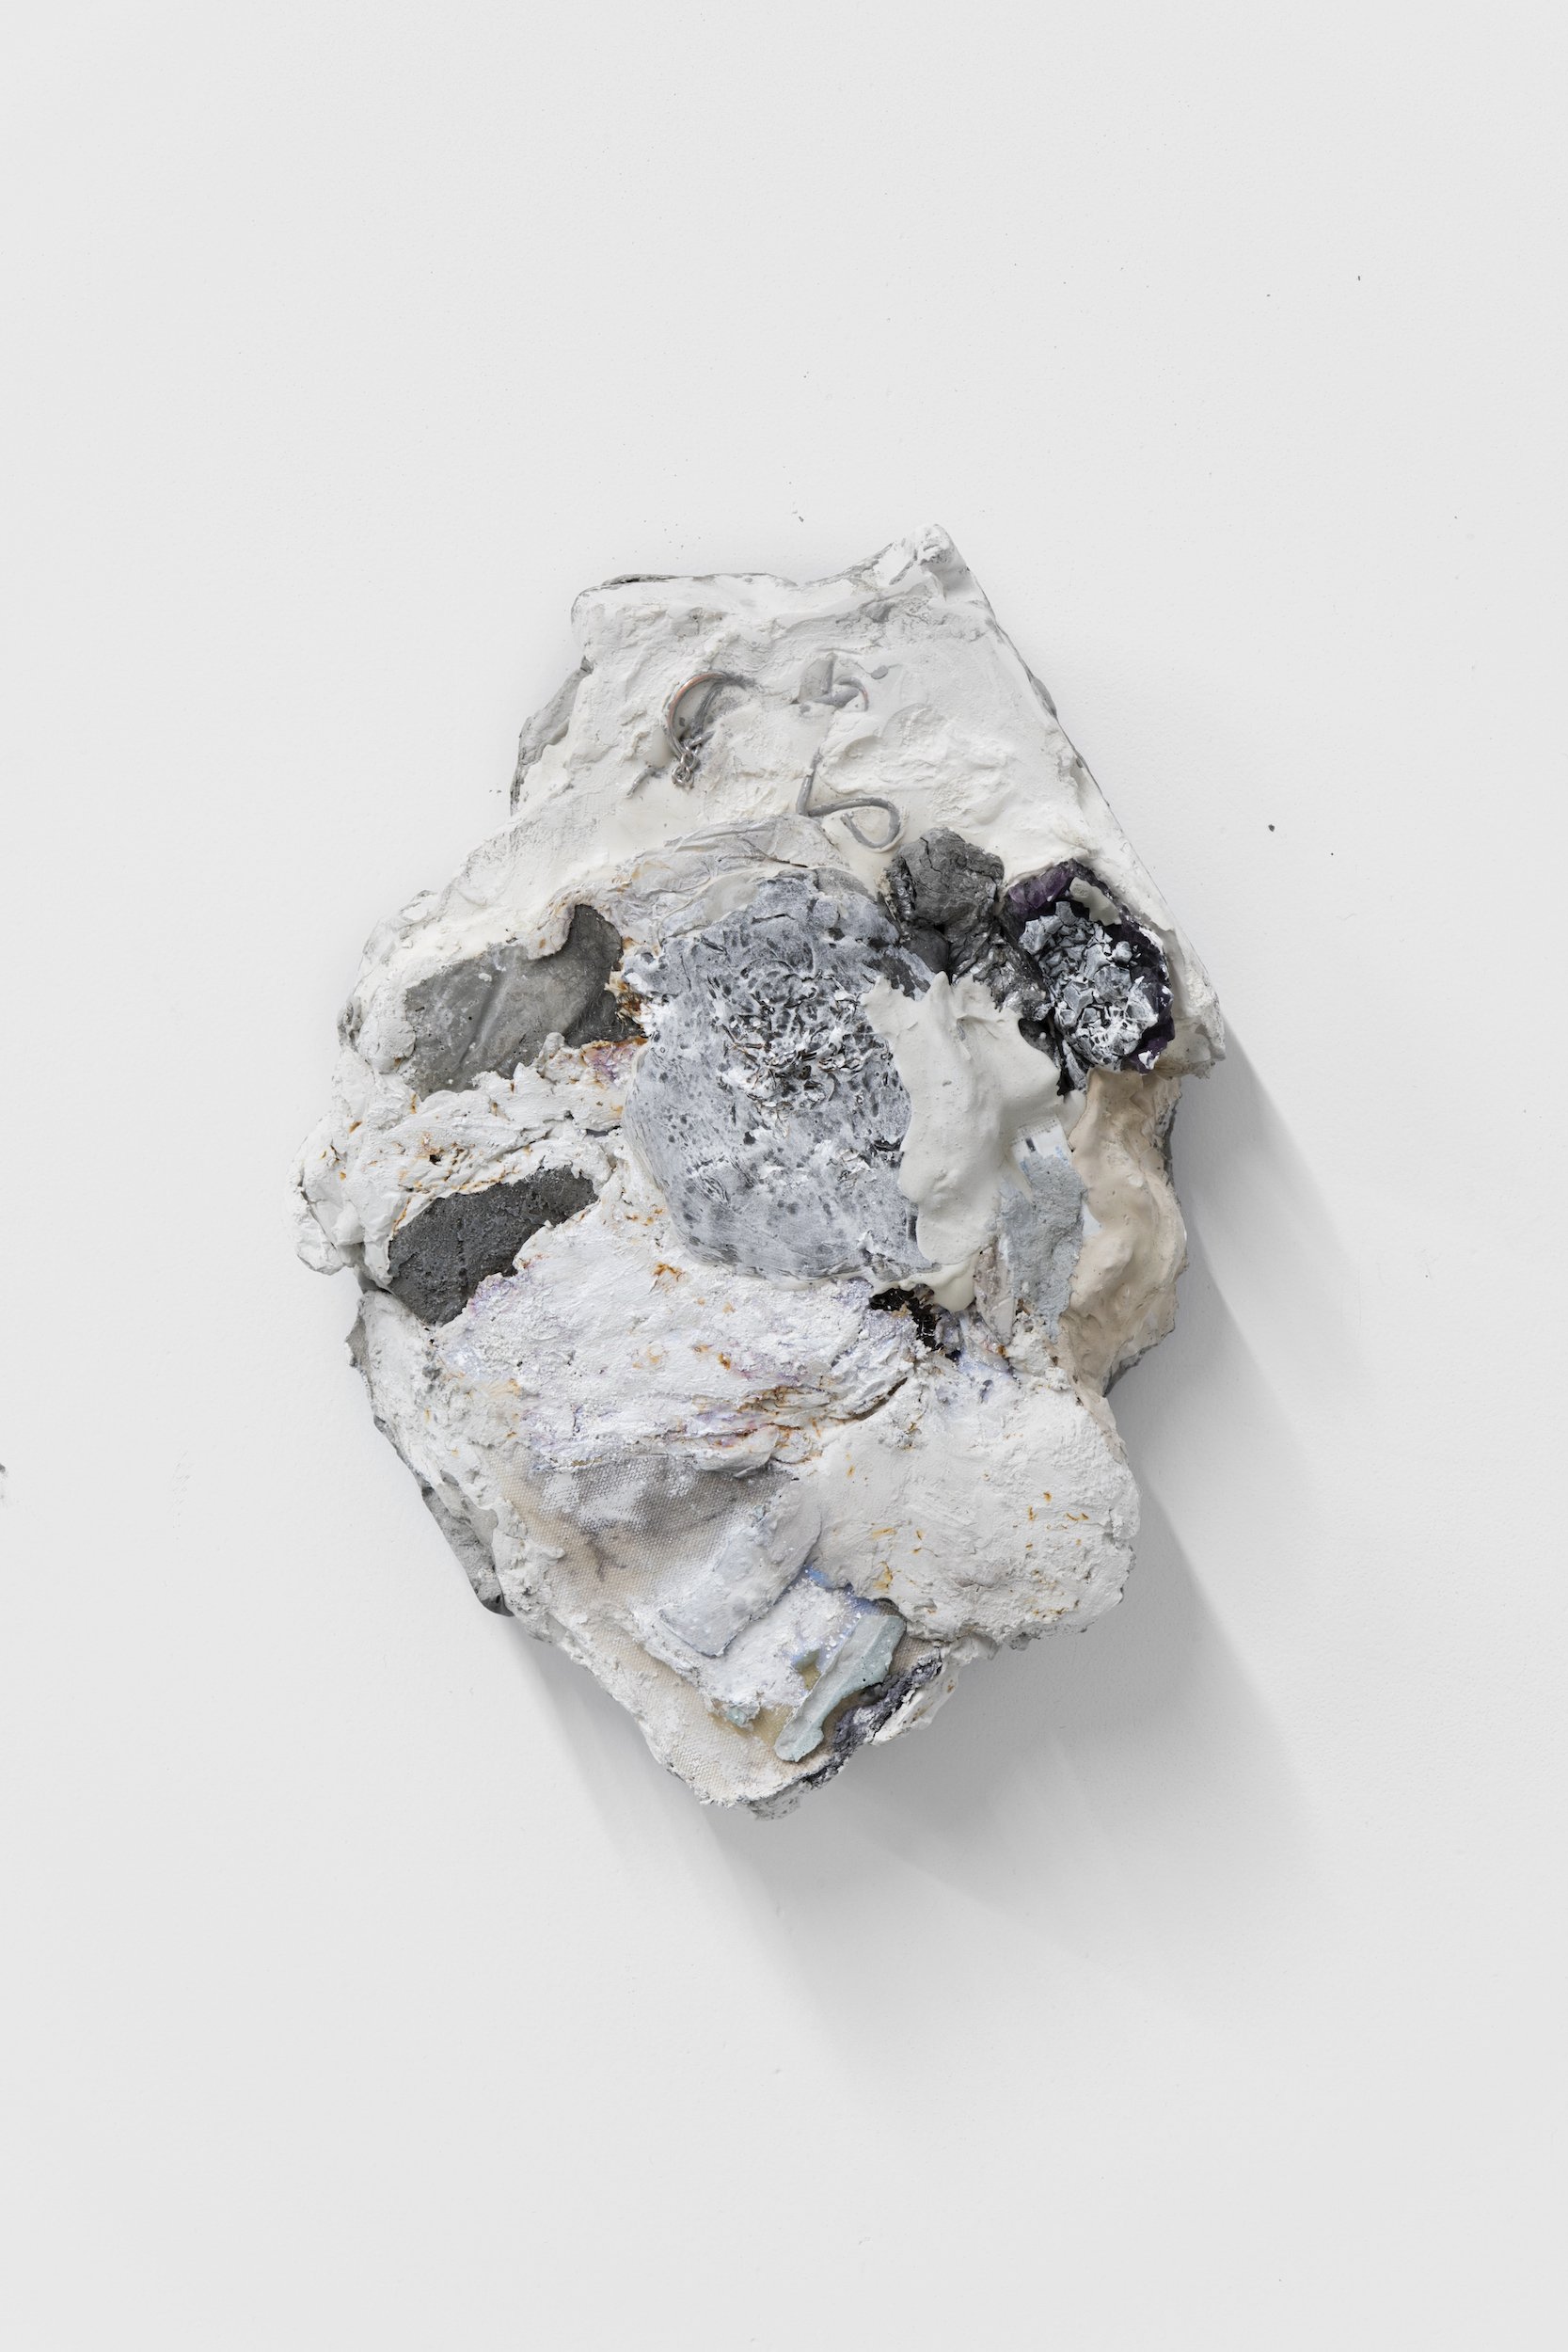  Laur P,  Now carrying an eternity of dysphoric refractions , 2024, Plaster, cement, canvas, steel wool, nail polish, dry pigment, amethyst (from childhood collection), cigarette wrappers, metal chain puzzle, acrylic paint, desiccant packet, paper pu